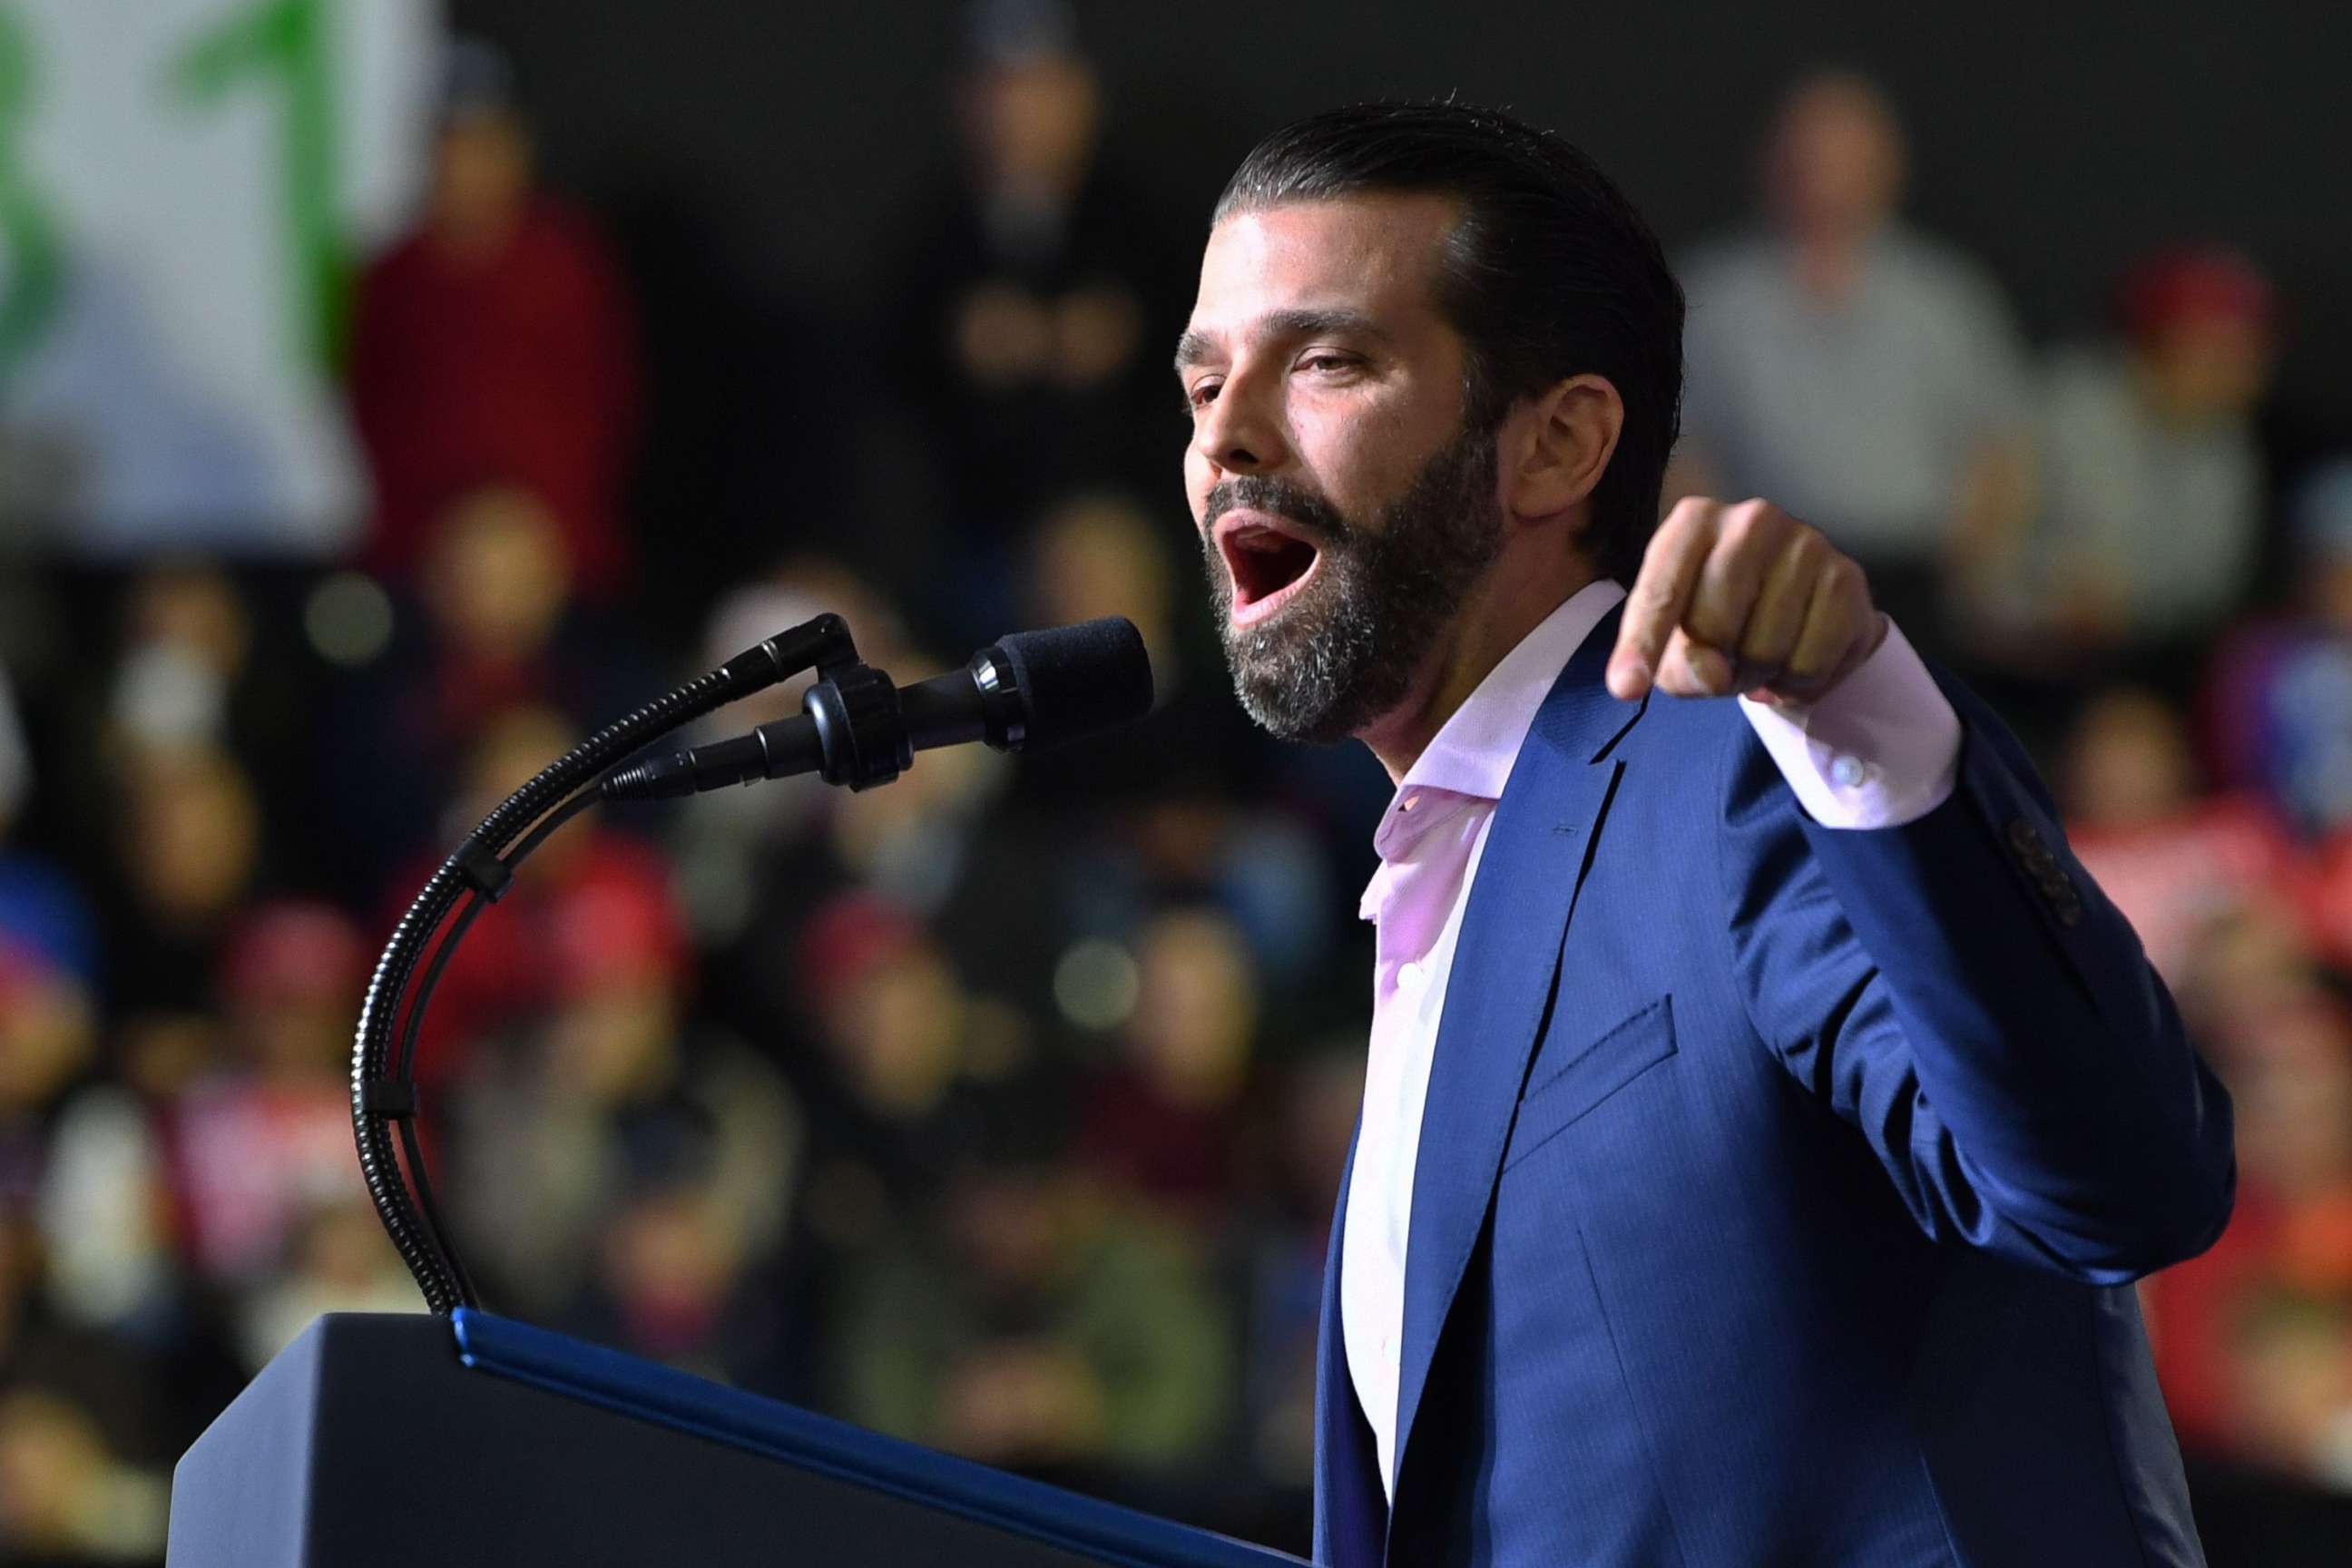 PHOTO: Donald Trump Jr. speaks during a rally before President Donald Trump addresses the audience in El Paso, Texas, Feb. 11, 2019.